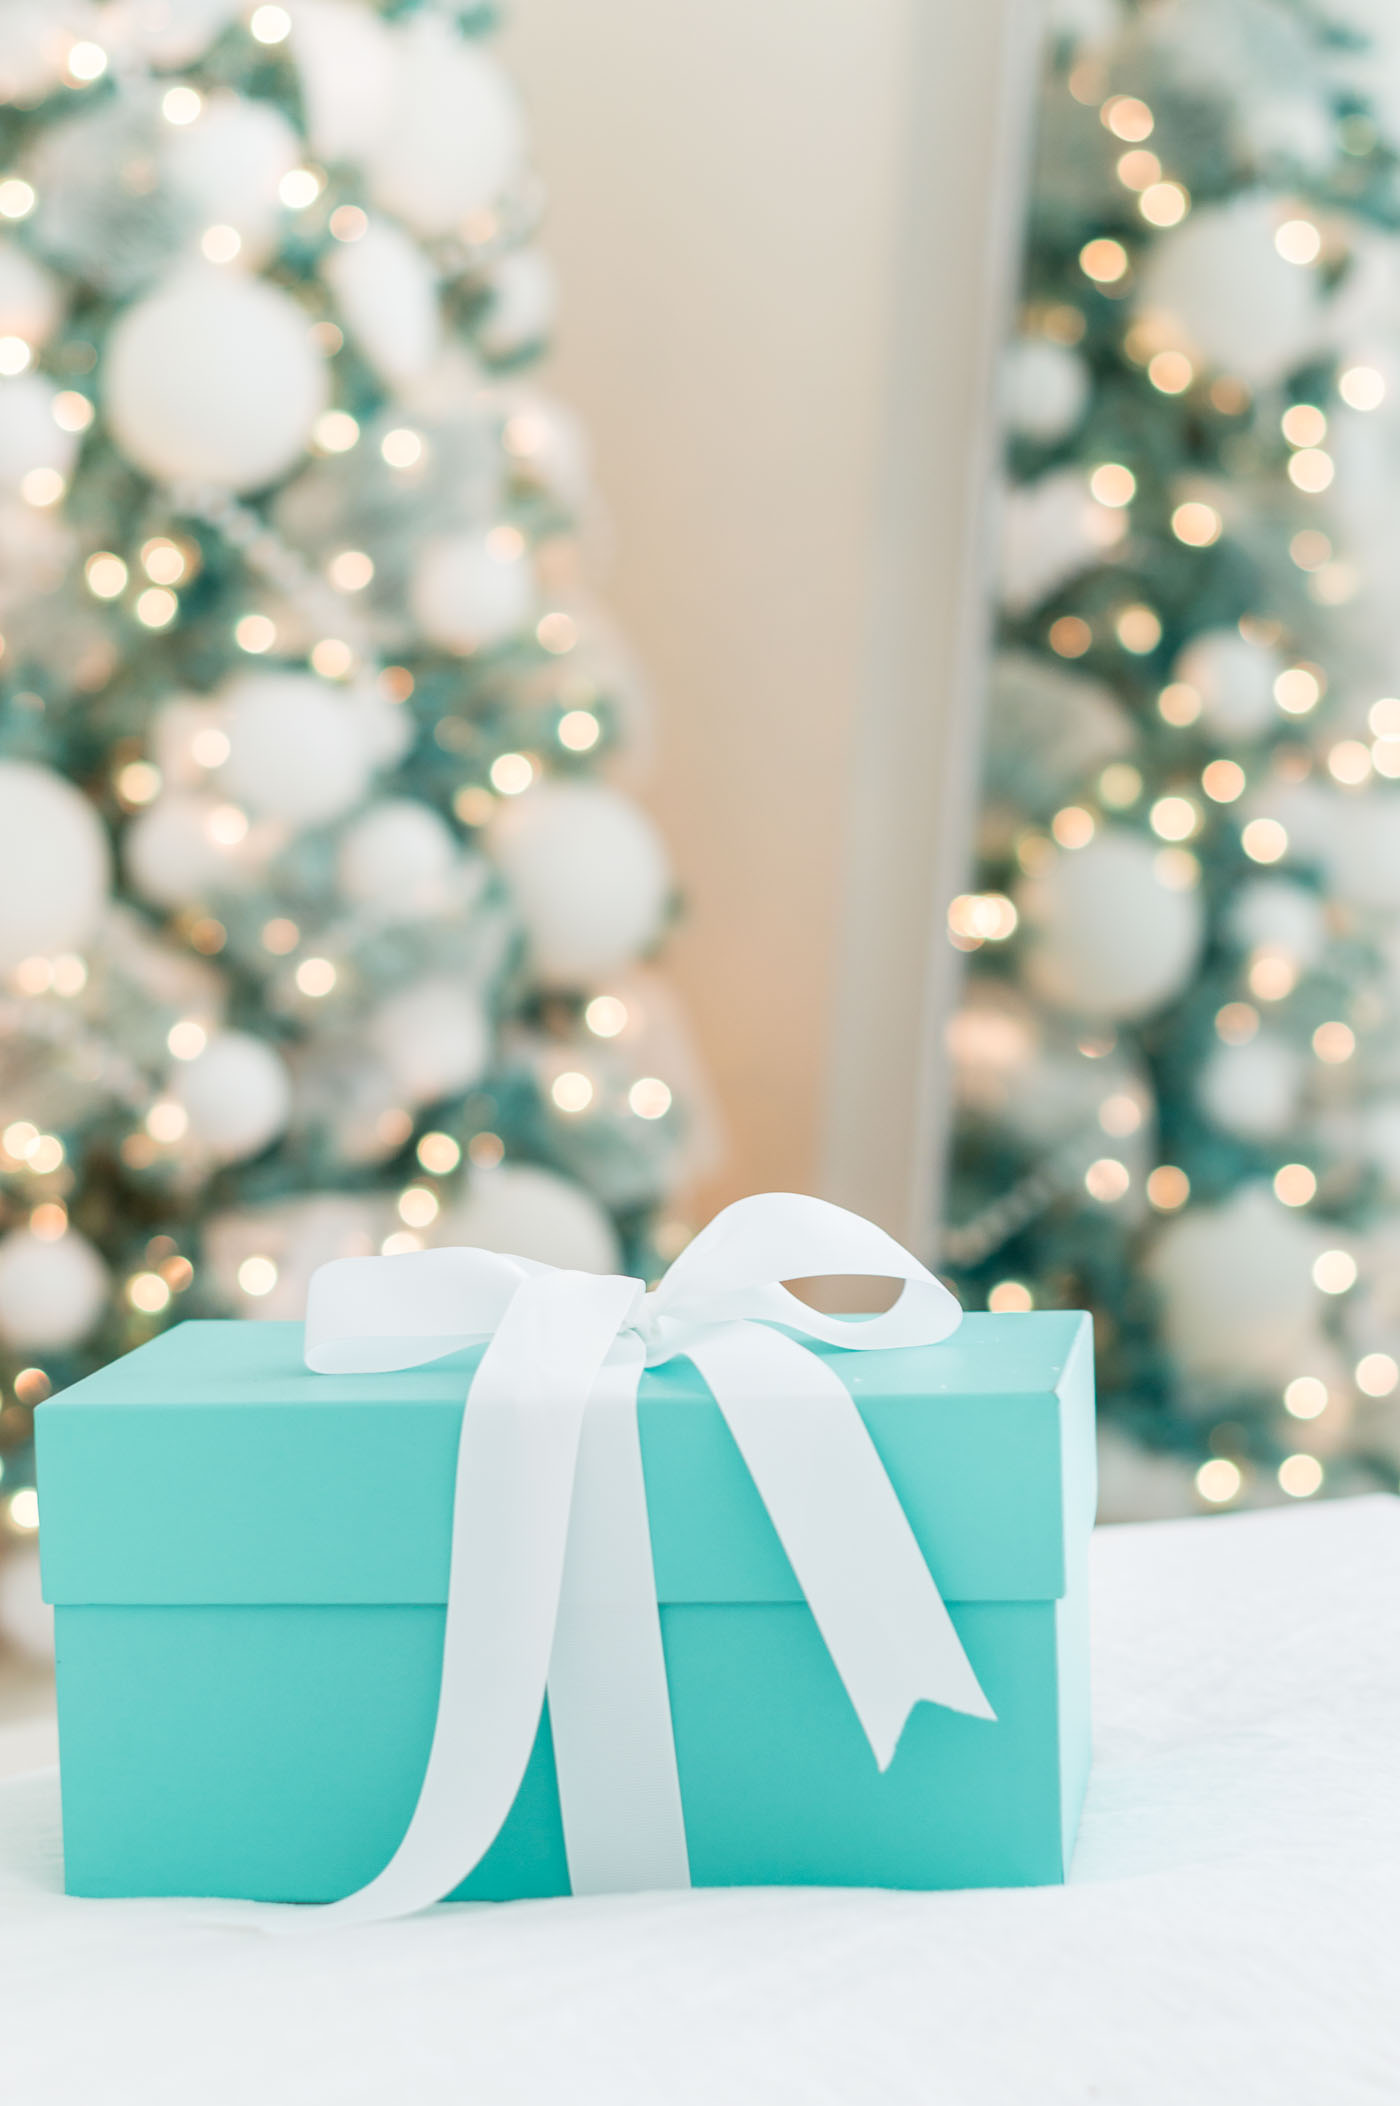 Using Tiffany Boxes in Christmas Decor